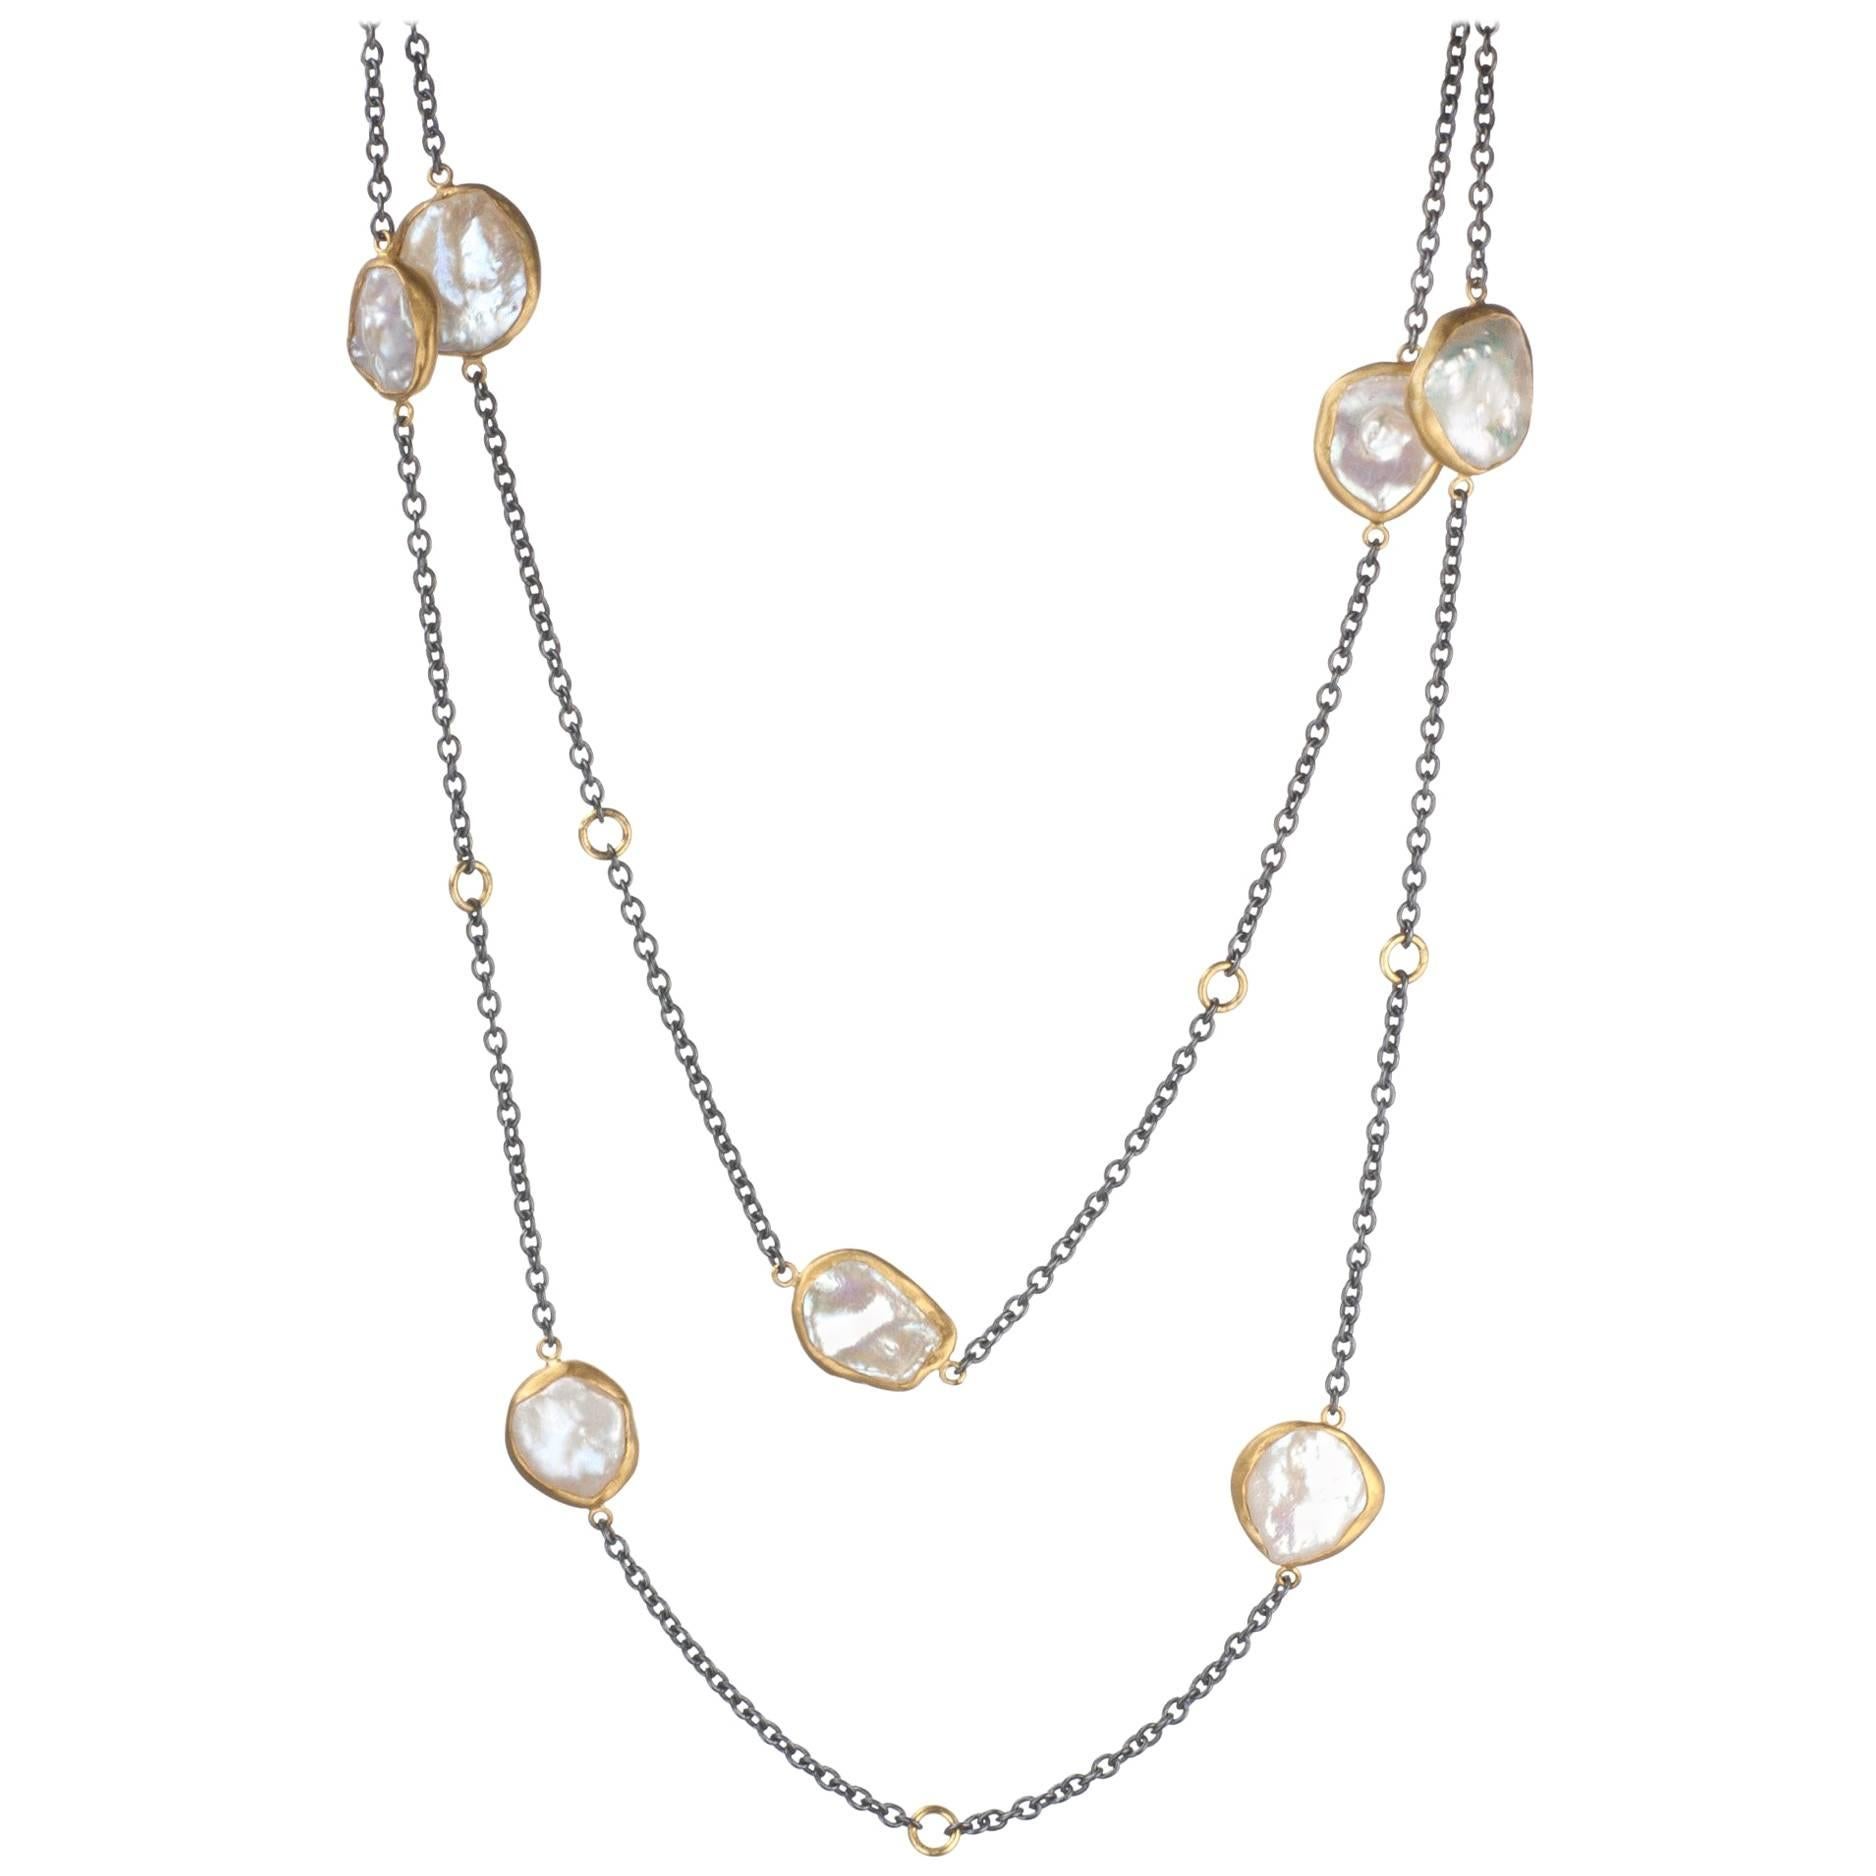 Lika Behar “Katya” Pearl Necklace in 24 Karat Yellow Gold and Oxidized Sterling For Sale